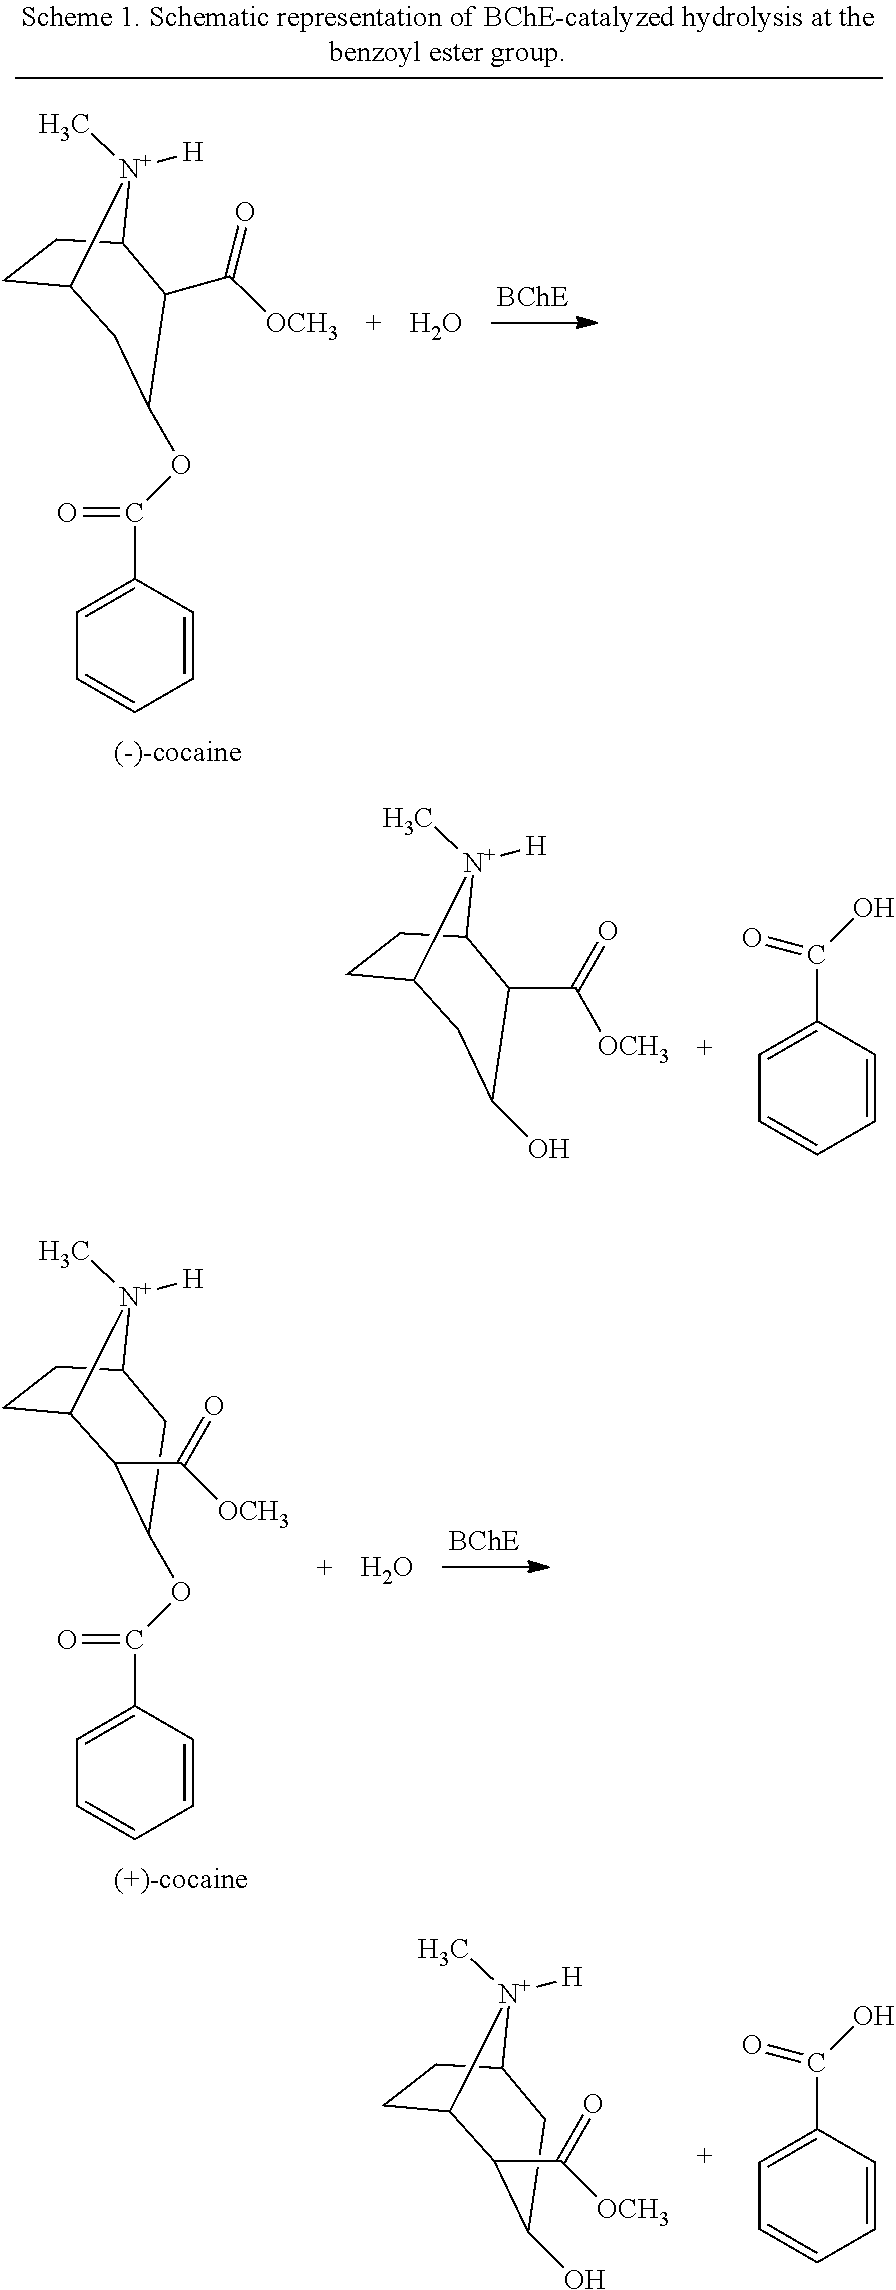 Cocaine hydrolase-FC fusion proteins for cocaine and methods for utilizing the same